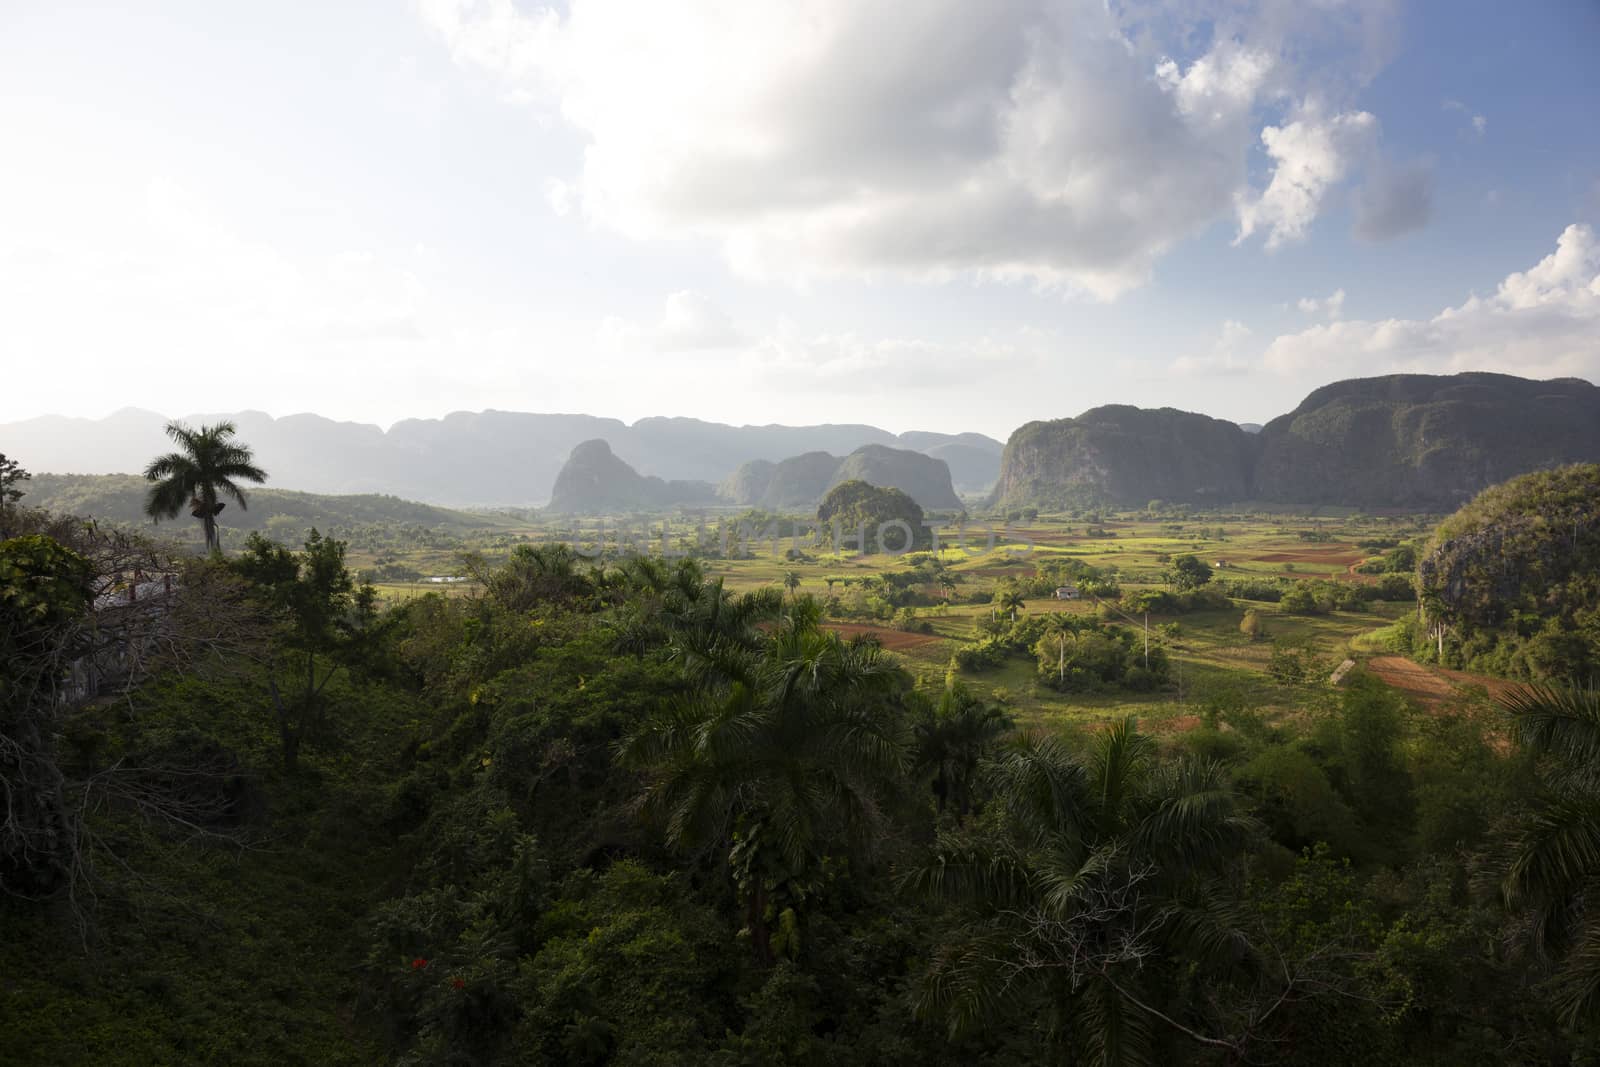 The Vinales valley in Cuba, a famous tourist destination and a major tobacco growing area, Cuba